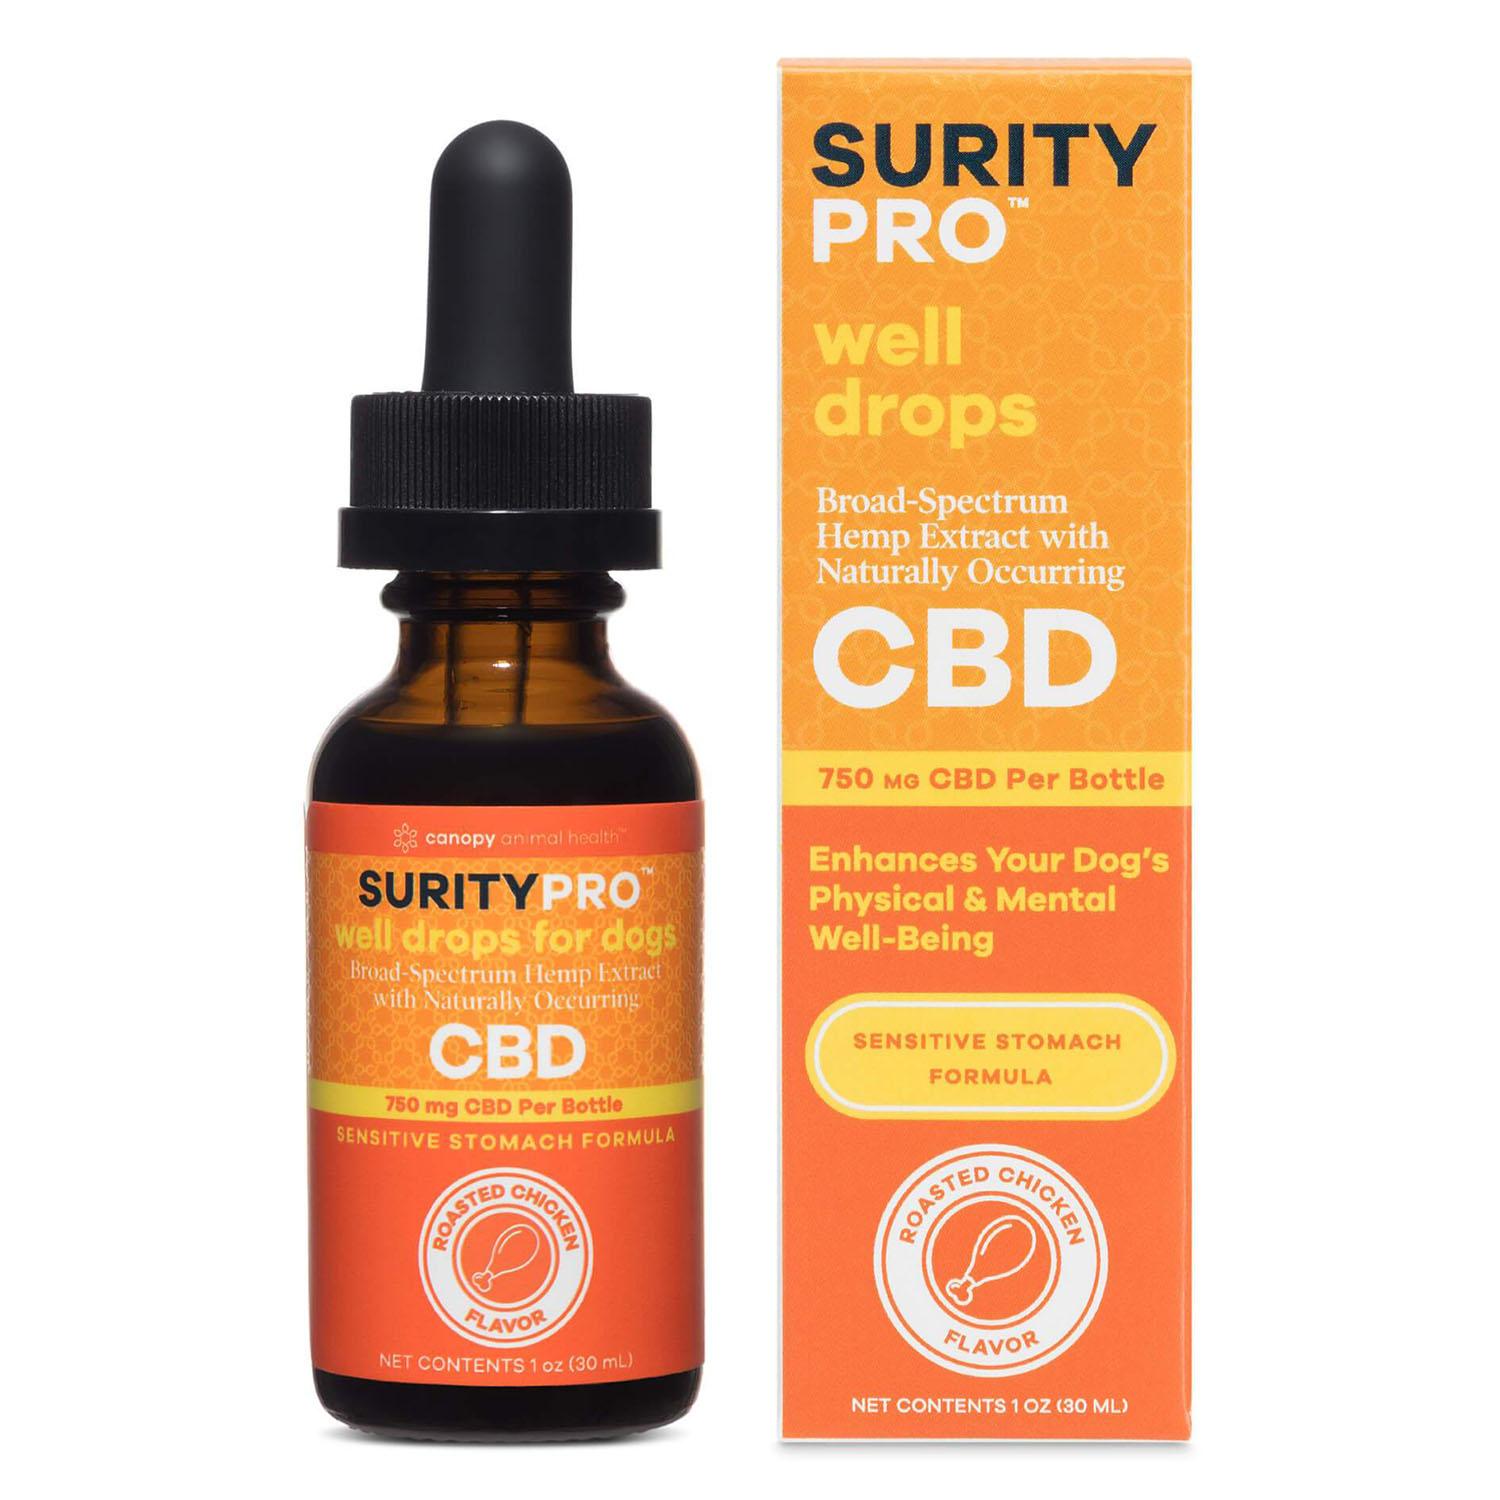 Canopy Animal Health SURITYPRO CBD Oil Well Drops for Dogs - Roasted Chicken